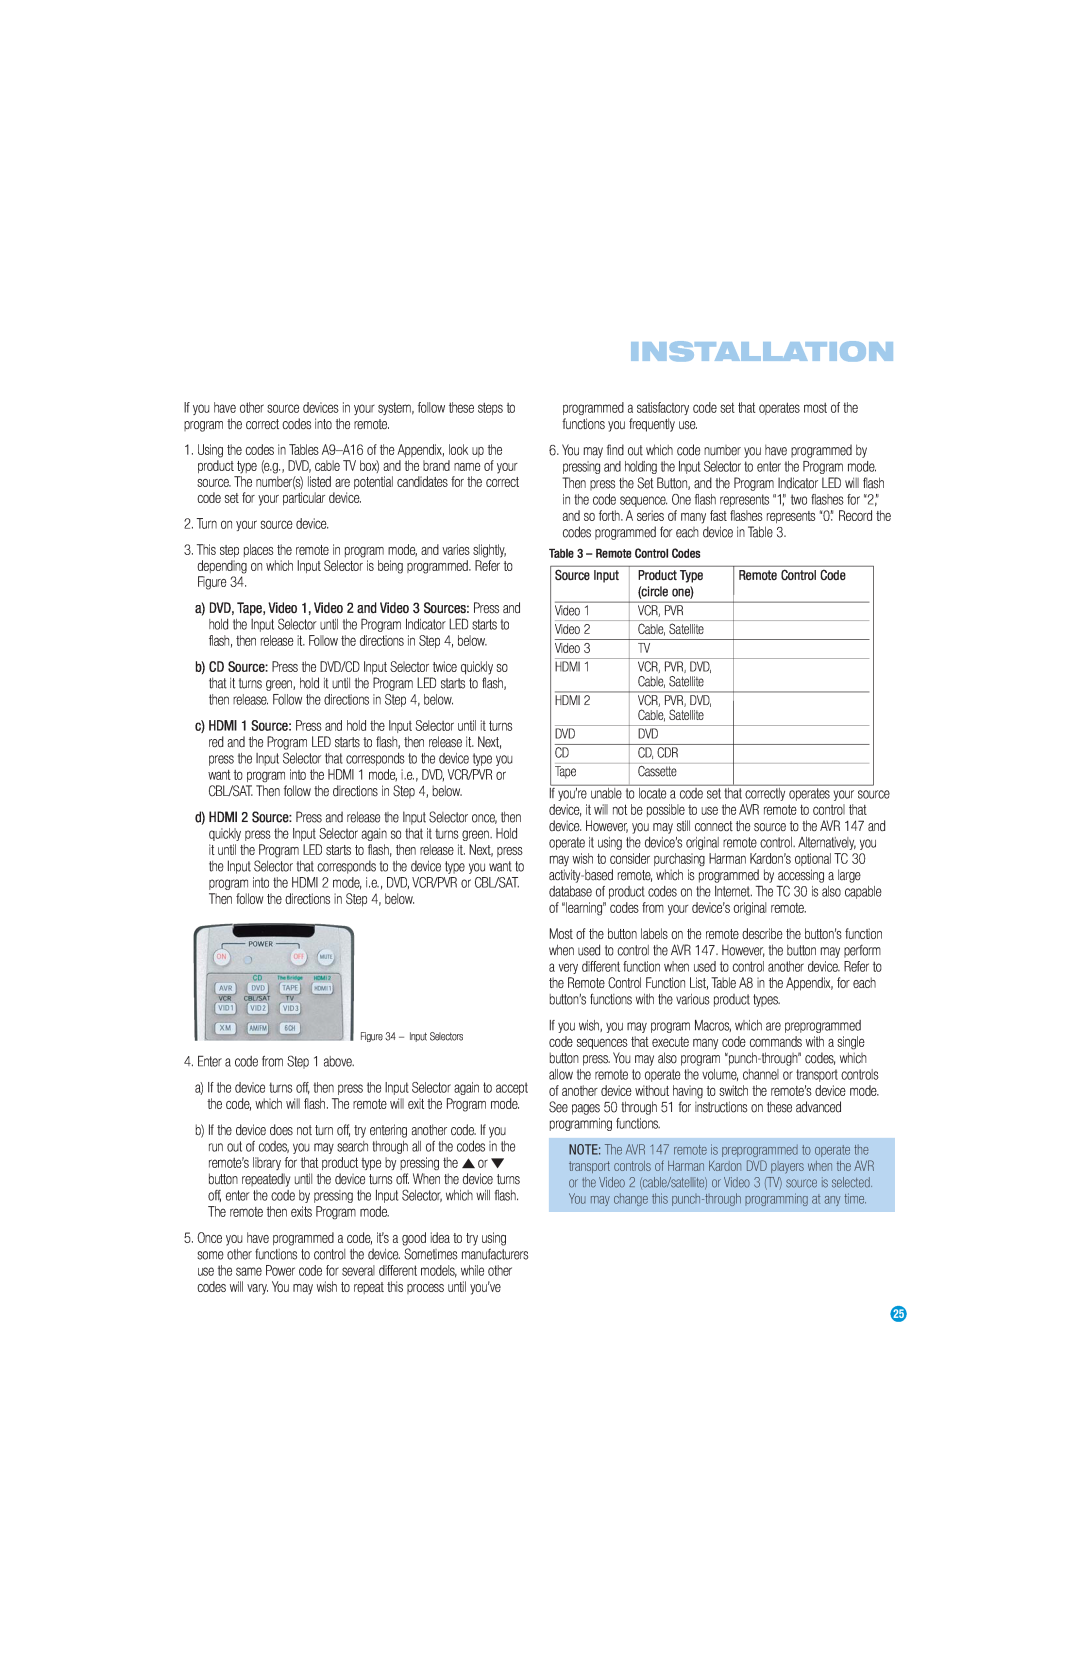 Harman-Kardon AVR 147 owner manual Installation, Turn on your source device, Enter a code from above 